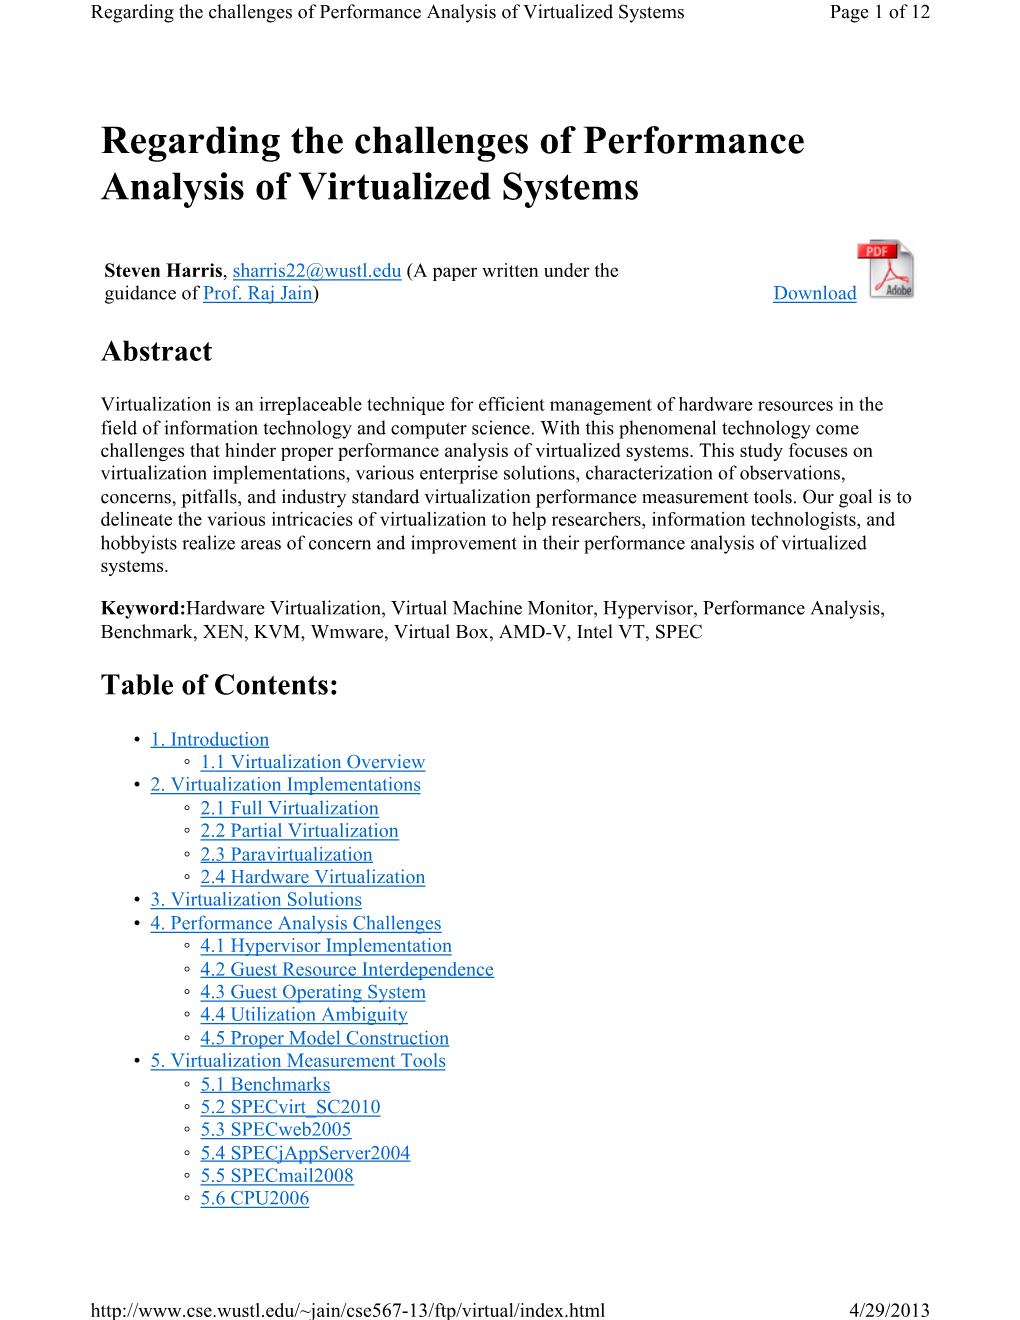 Regarding the Challenges of Performance Analysis of Virtualized Systems Page 1 of 12